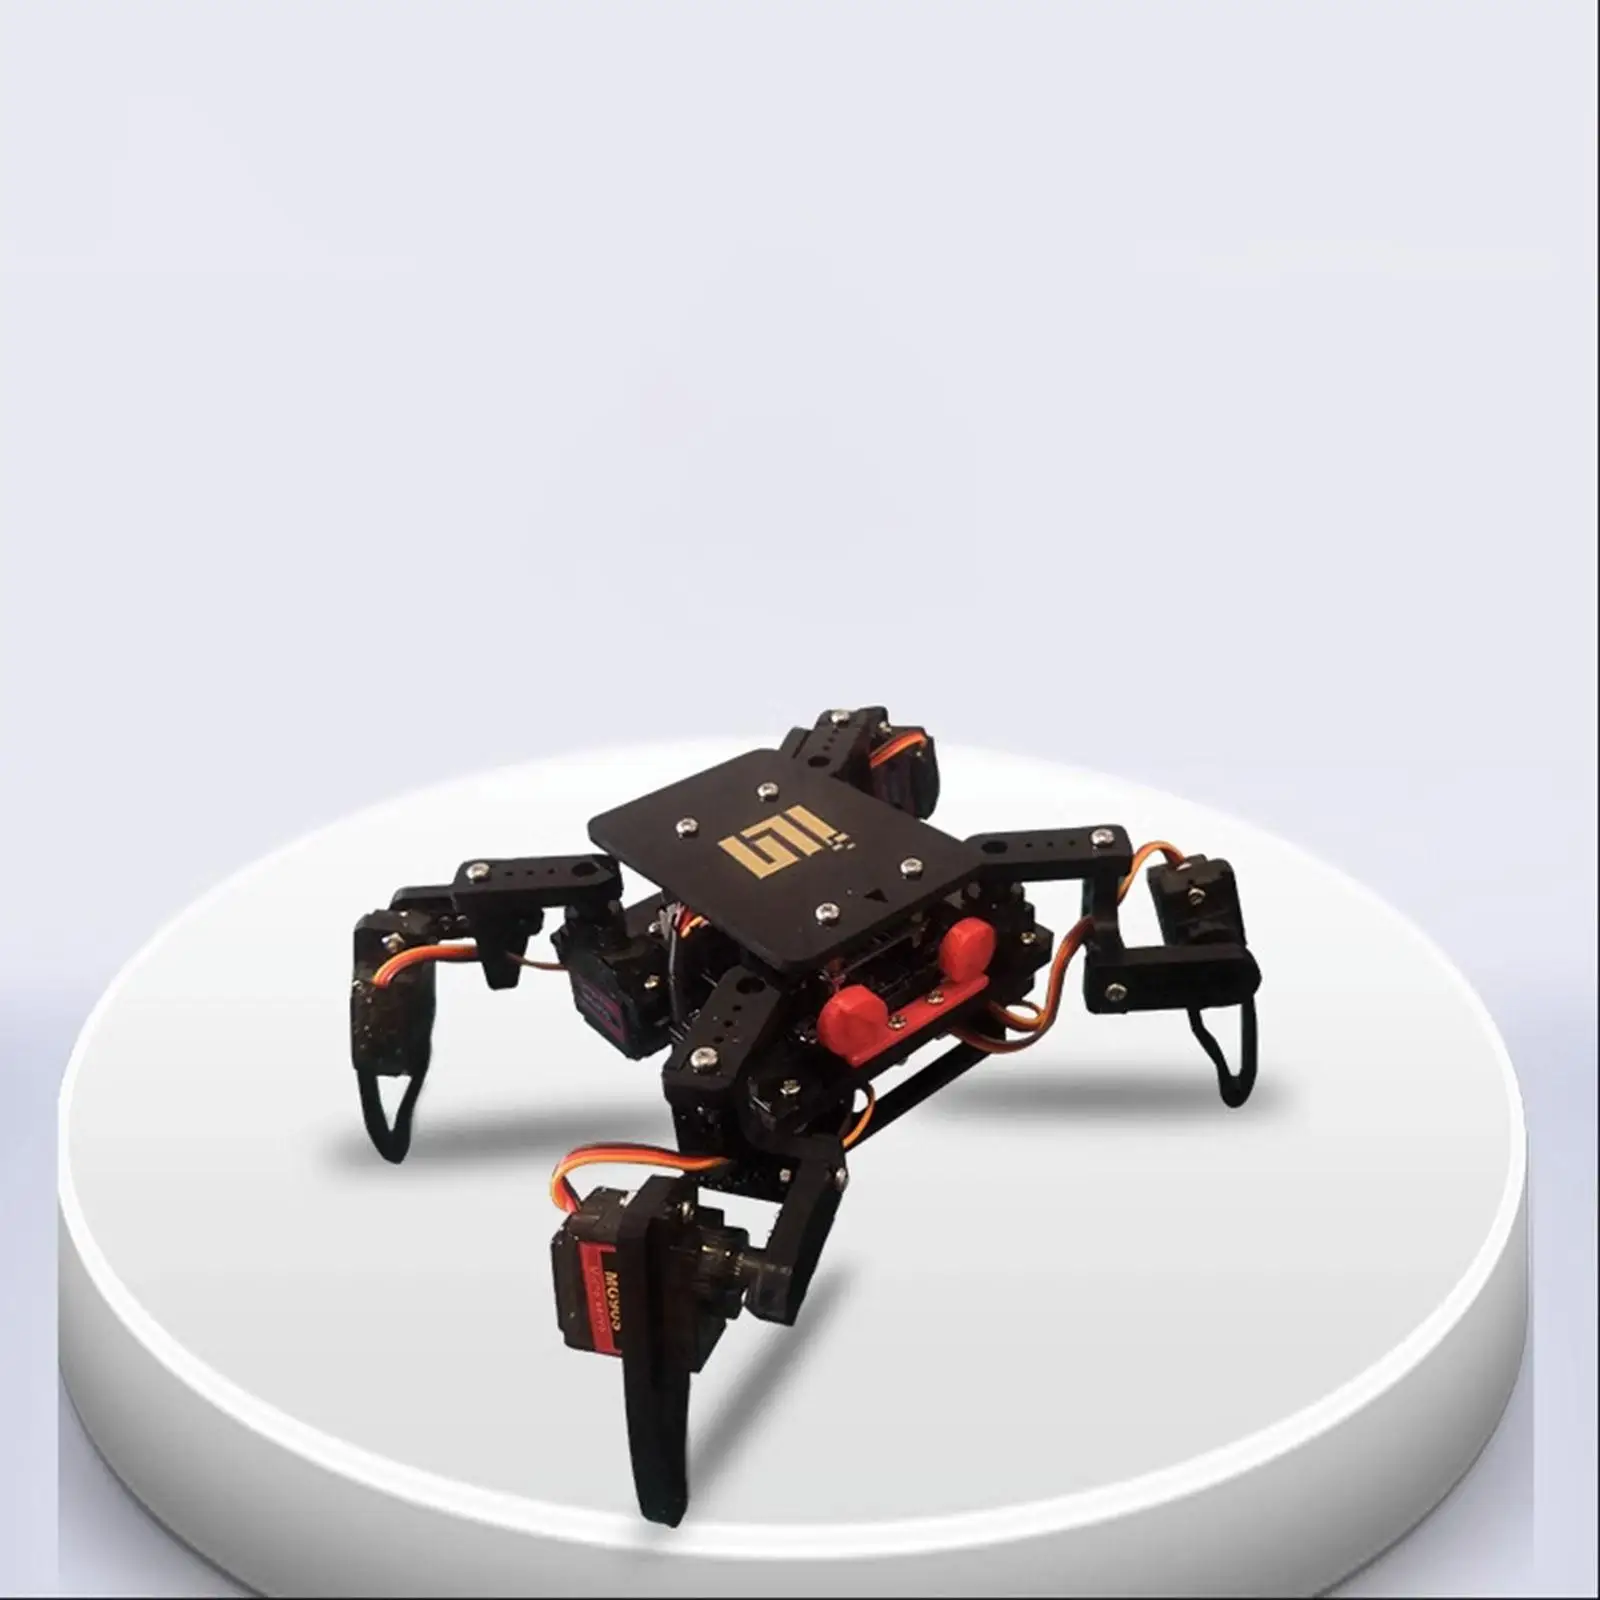 DIY Quadruped Robot Kits Lightweight App Control Scientific Building Kits for Teaching Aids Electronic Competition Teens Adults